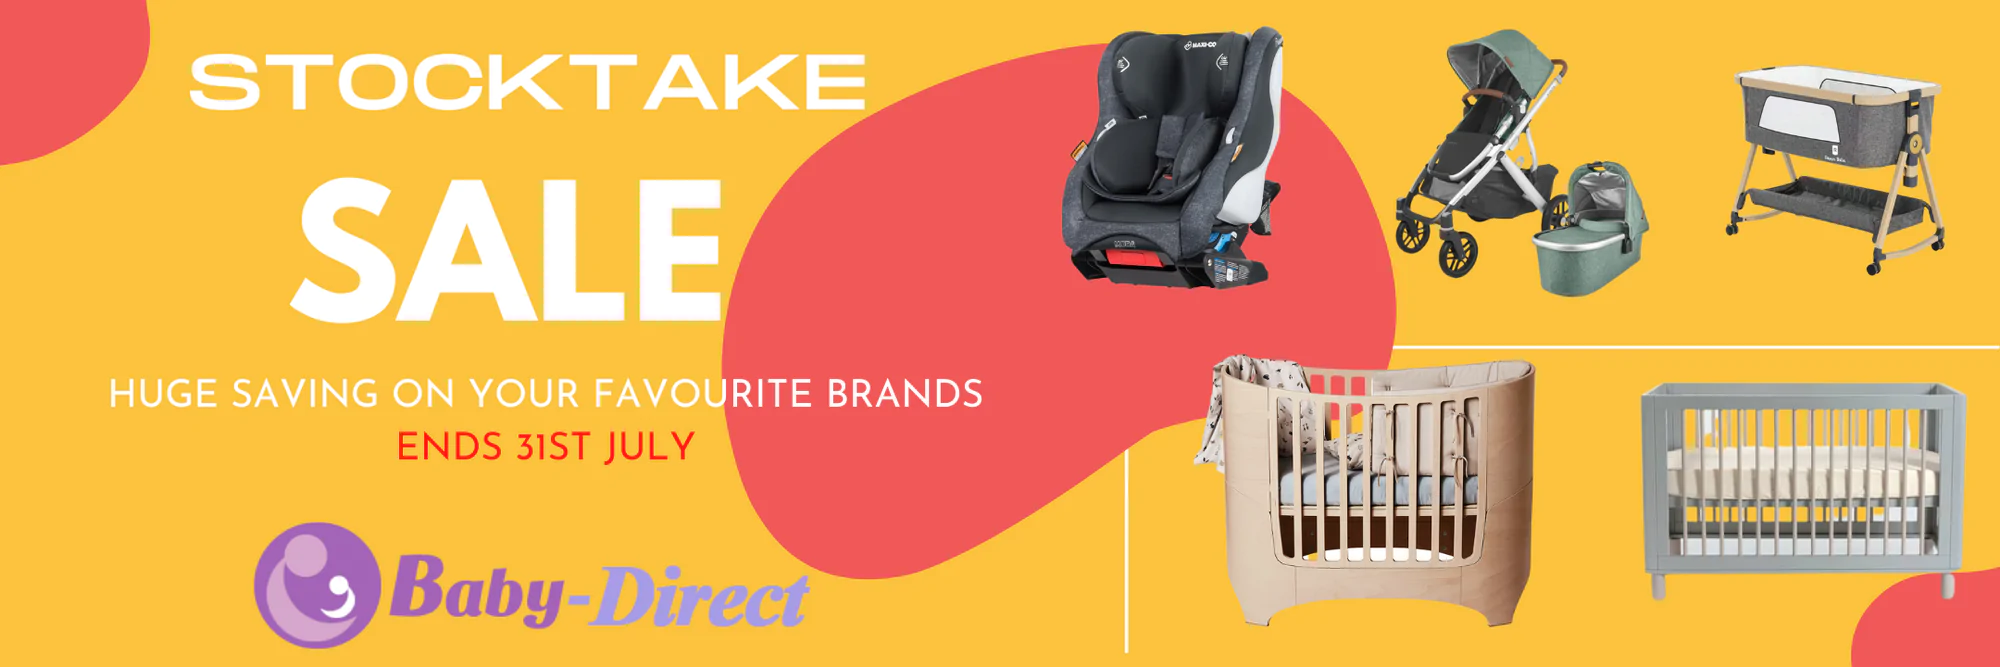 Baby-Direct Stocktake sale up to 60% OFF on baby wear, furniture, & more